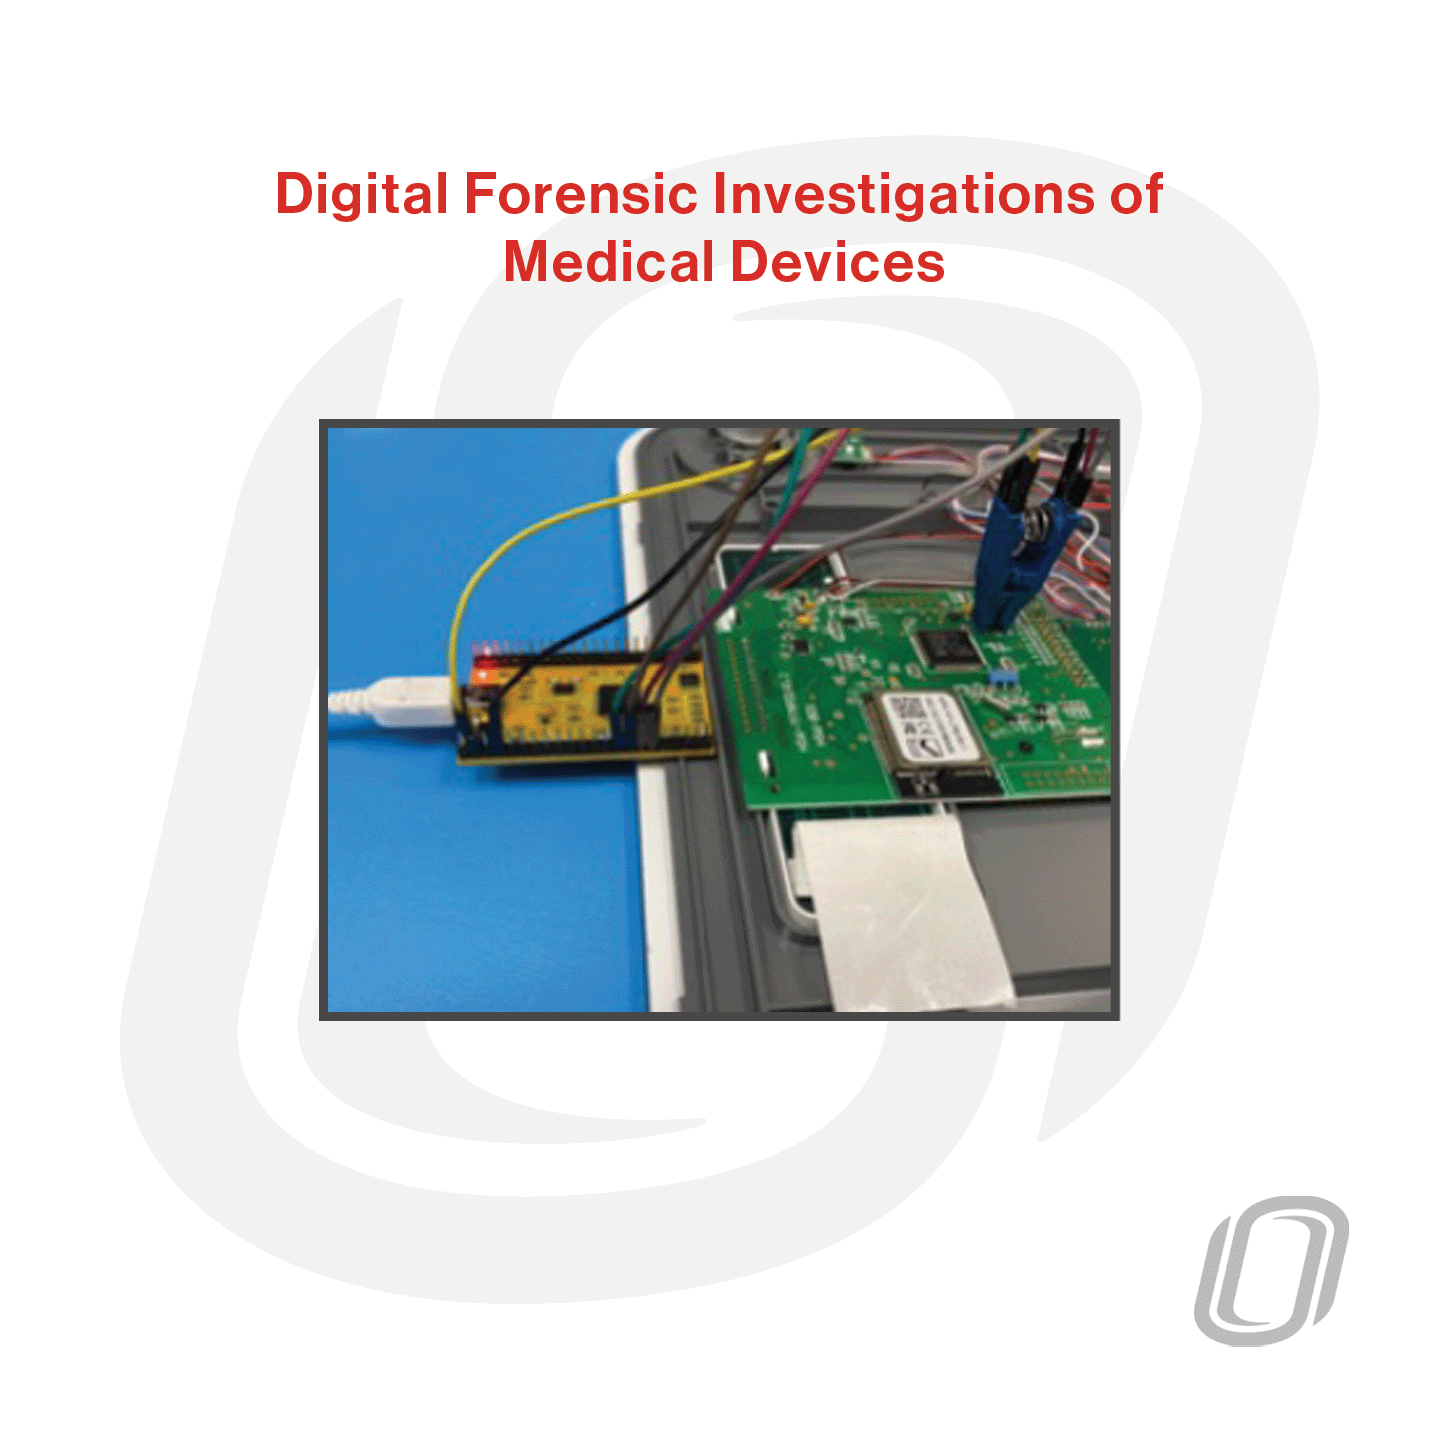 electronic components with a title "digital forensic investigations of medical devices"